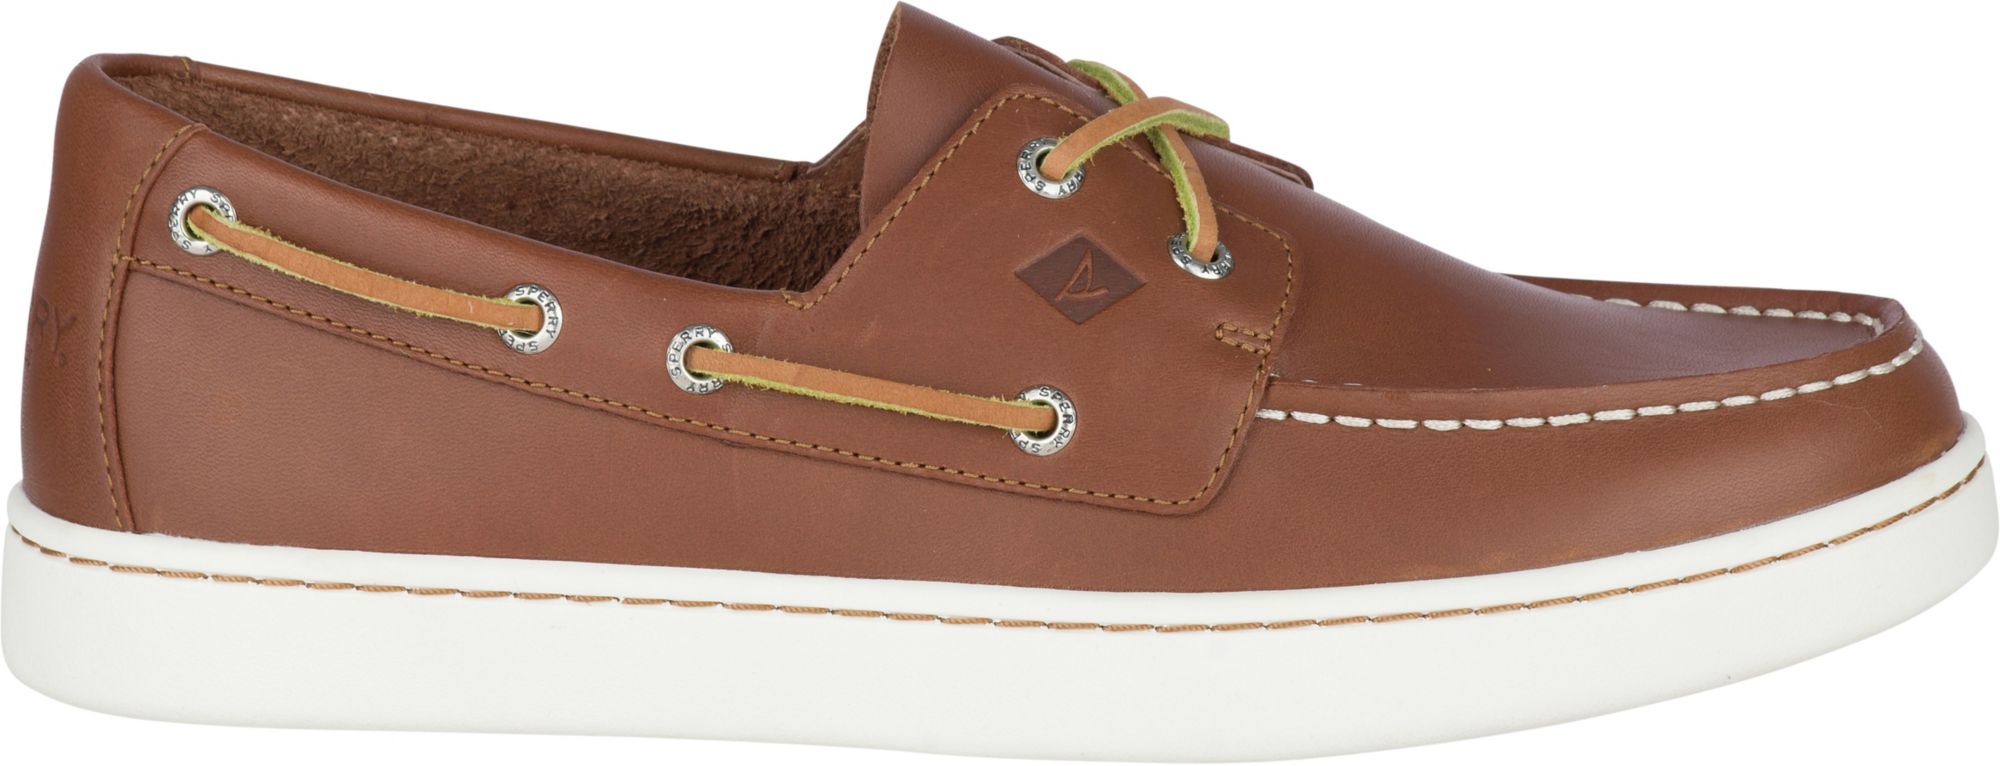 mens sperry boat shoes on sale